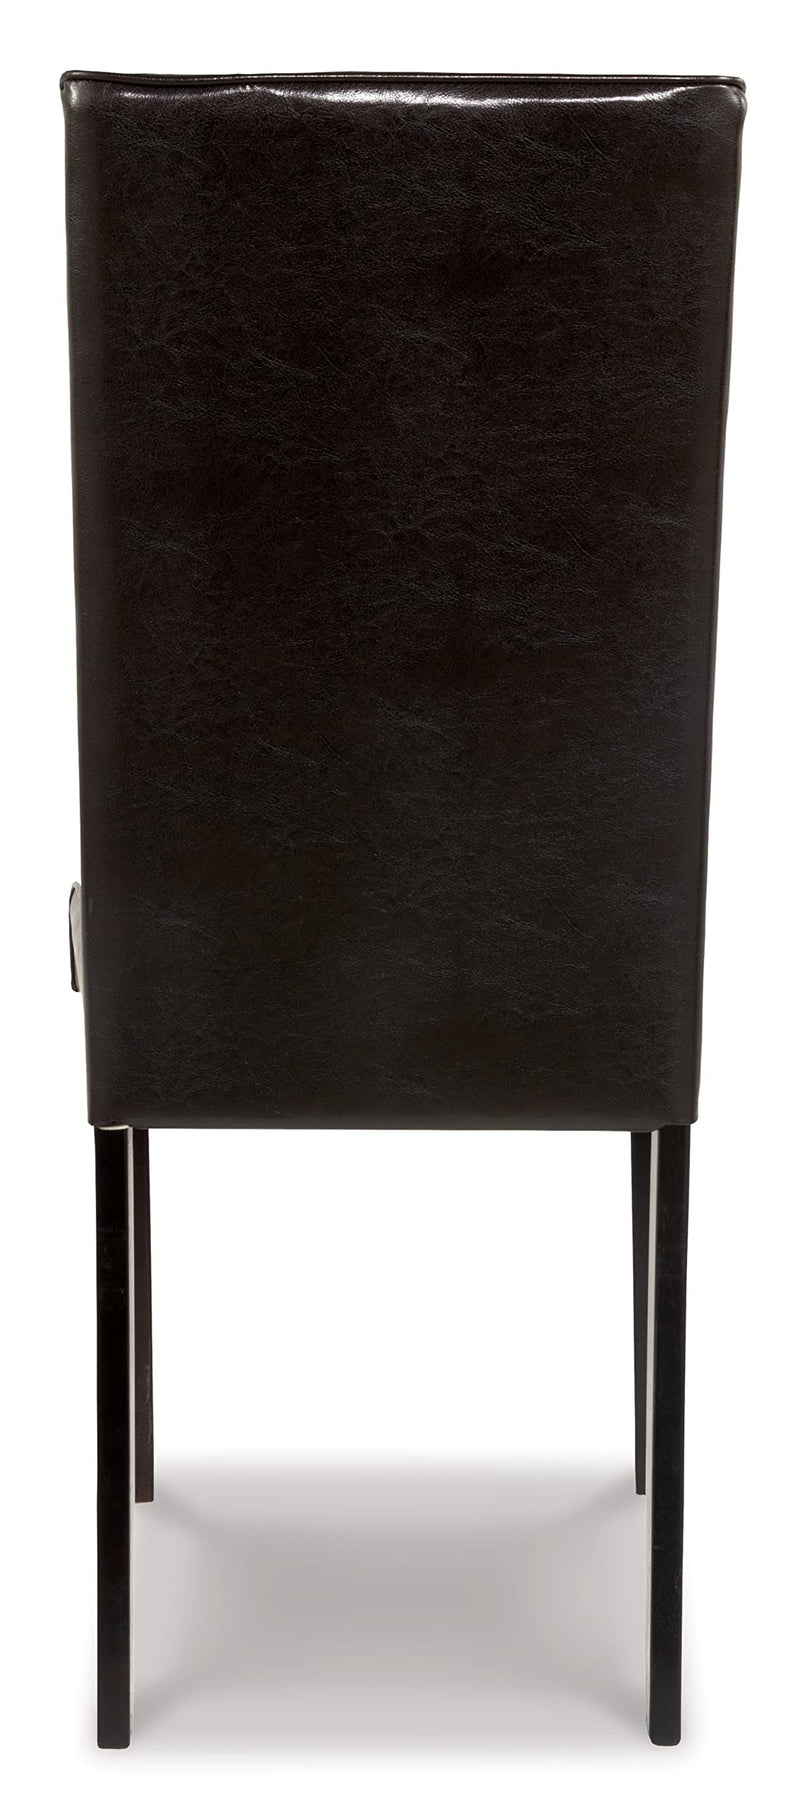 Kimonte Modern 19" Faux Leather Upholstered Armless Dining Chair